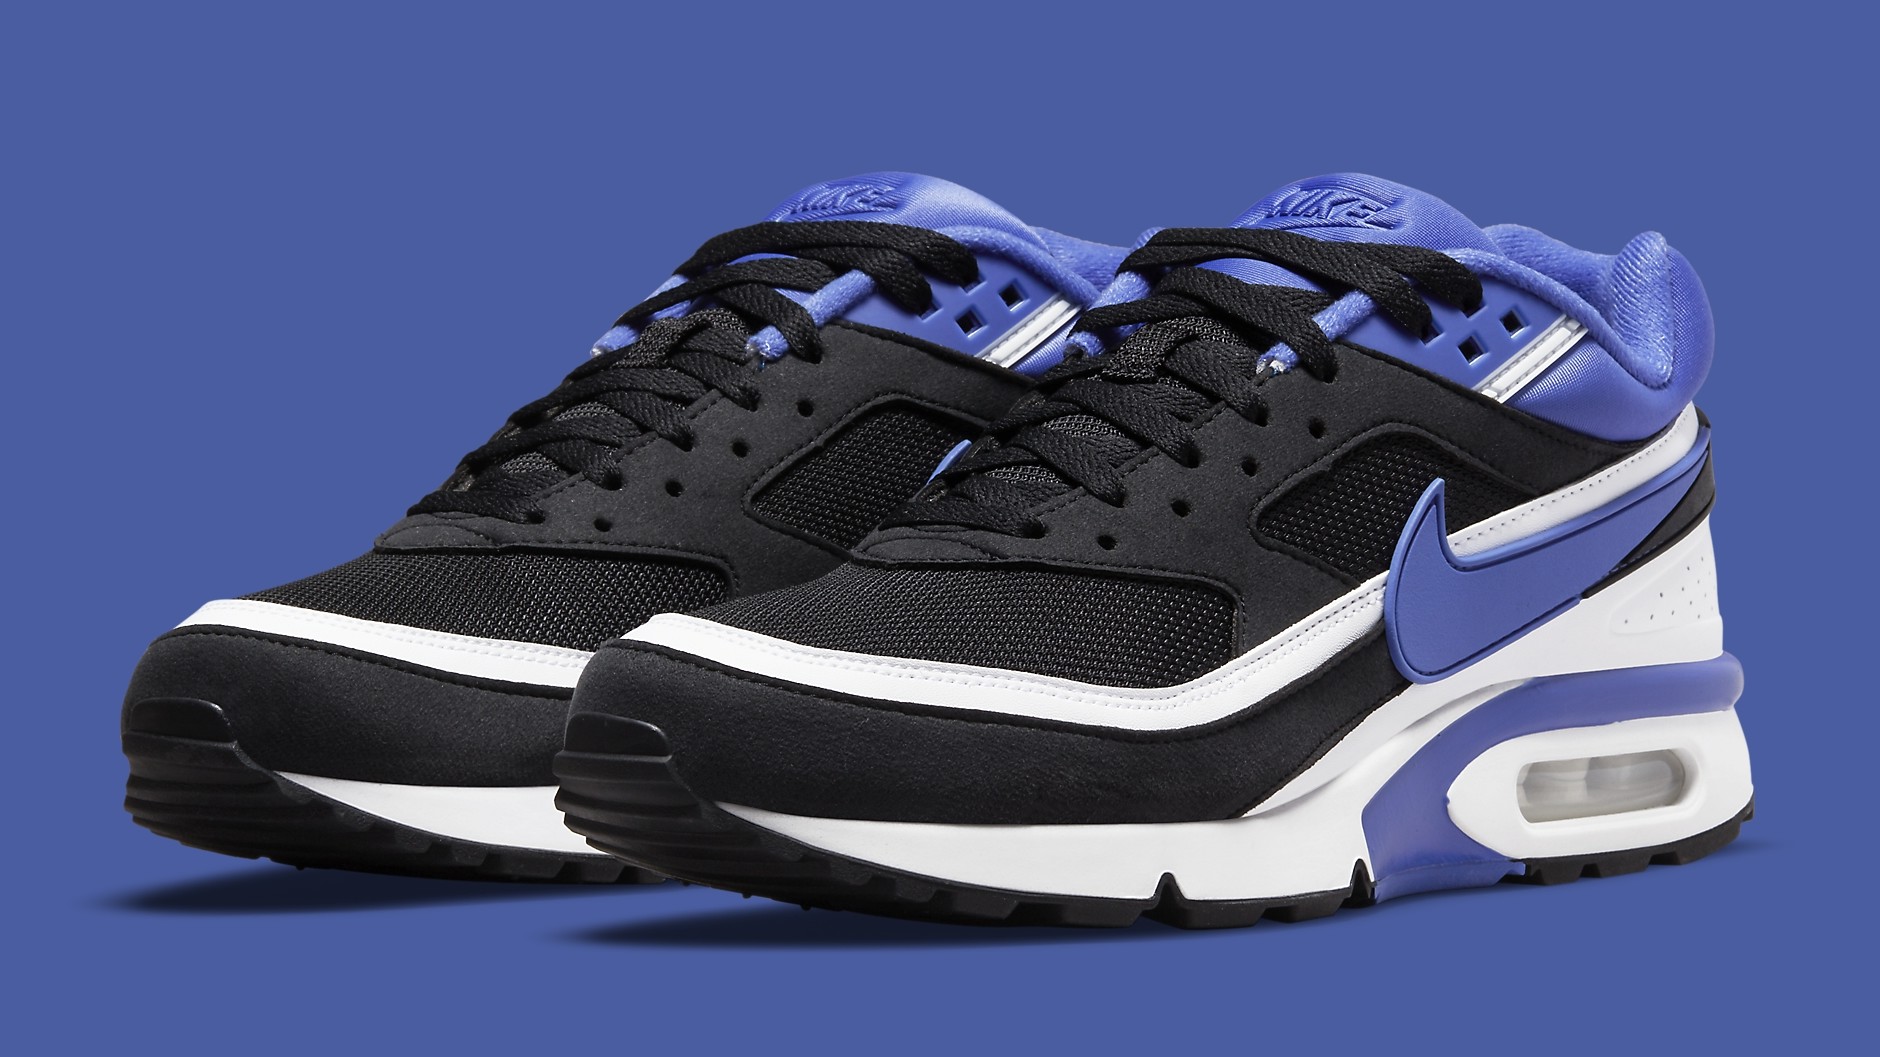 Nike Max BW 'Persian Violet' Release Date DJ6124-001​​​​​​​ | Sole Collector